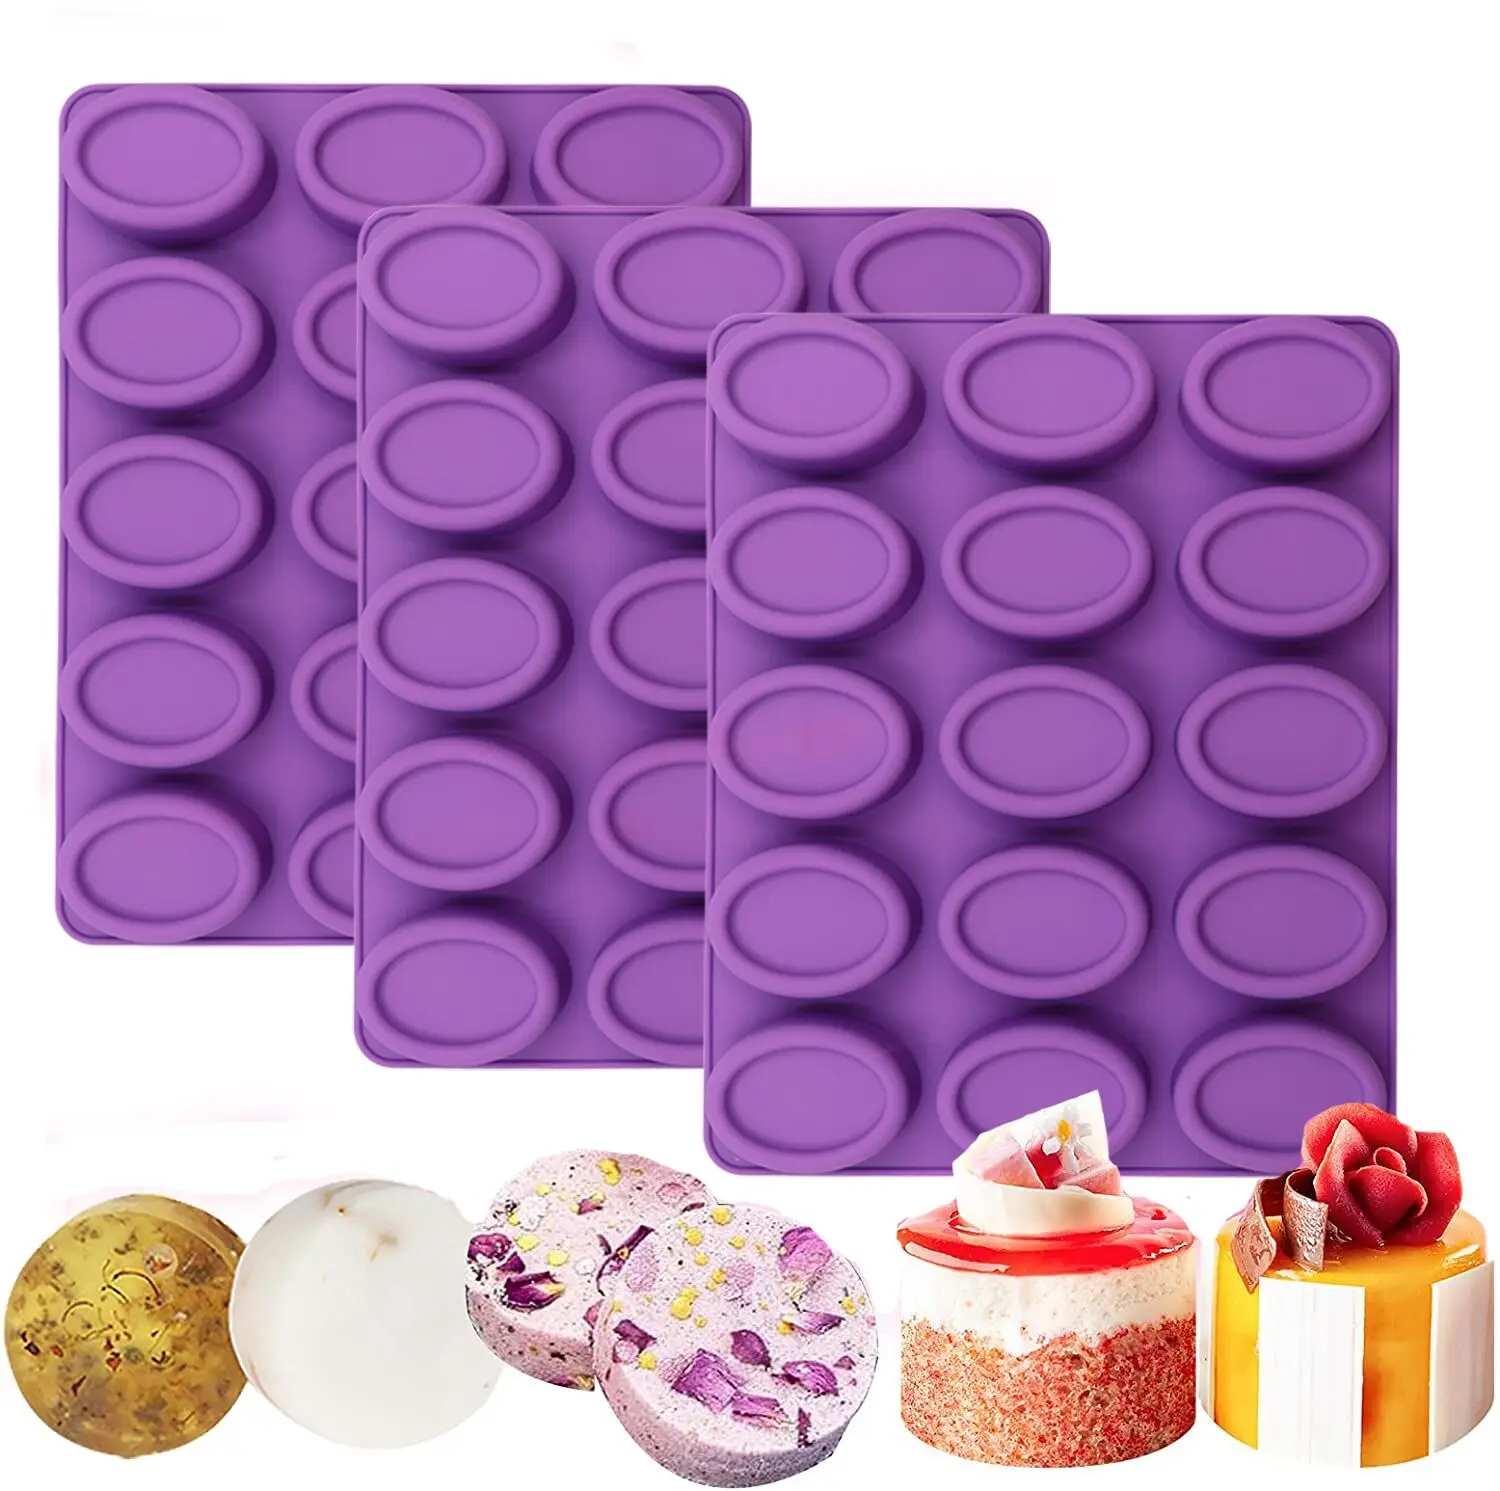 

Custom Highly Quality 15 Cavities Oval Shape DIY Handmade Silicone Soap Mold For Cake Soap Jelly Pudding Mold, Purple